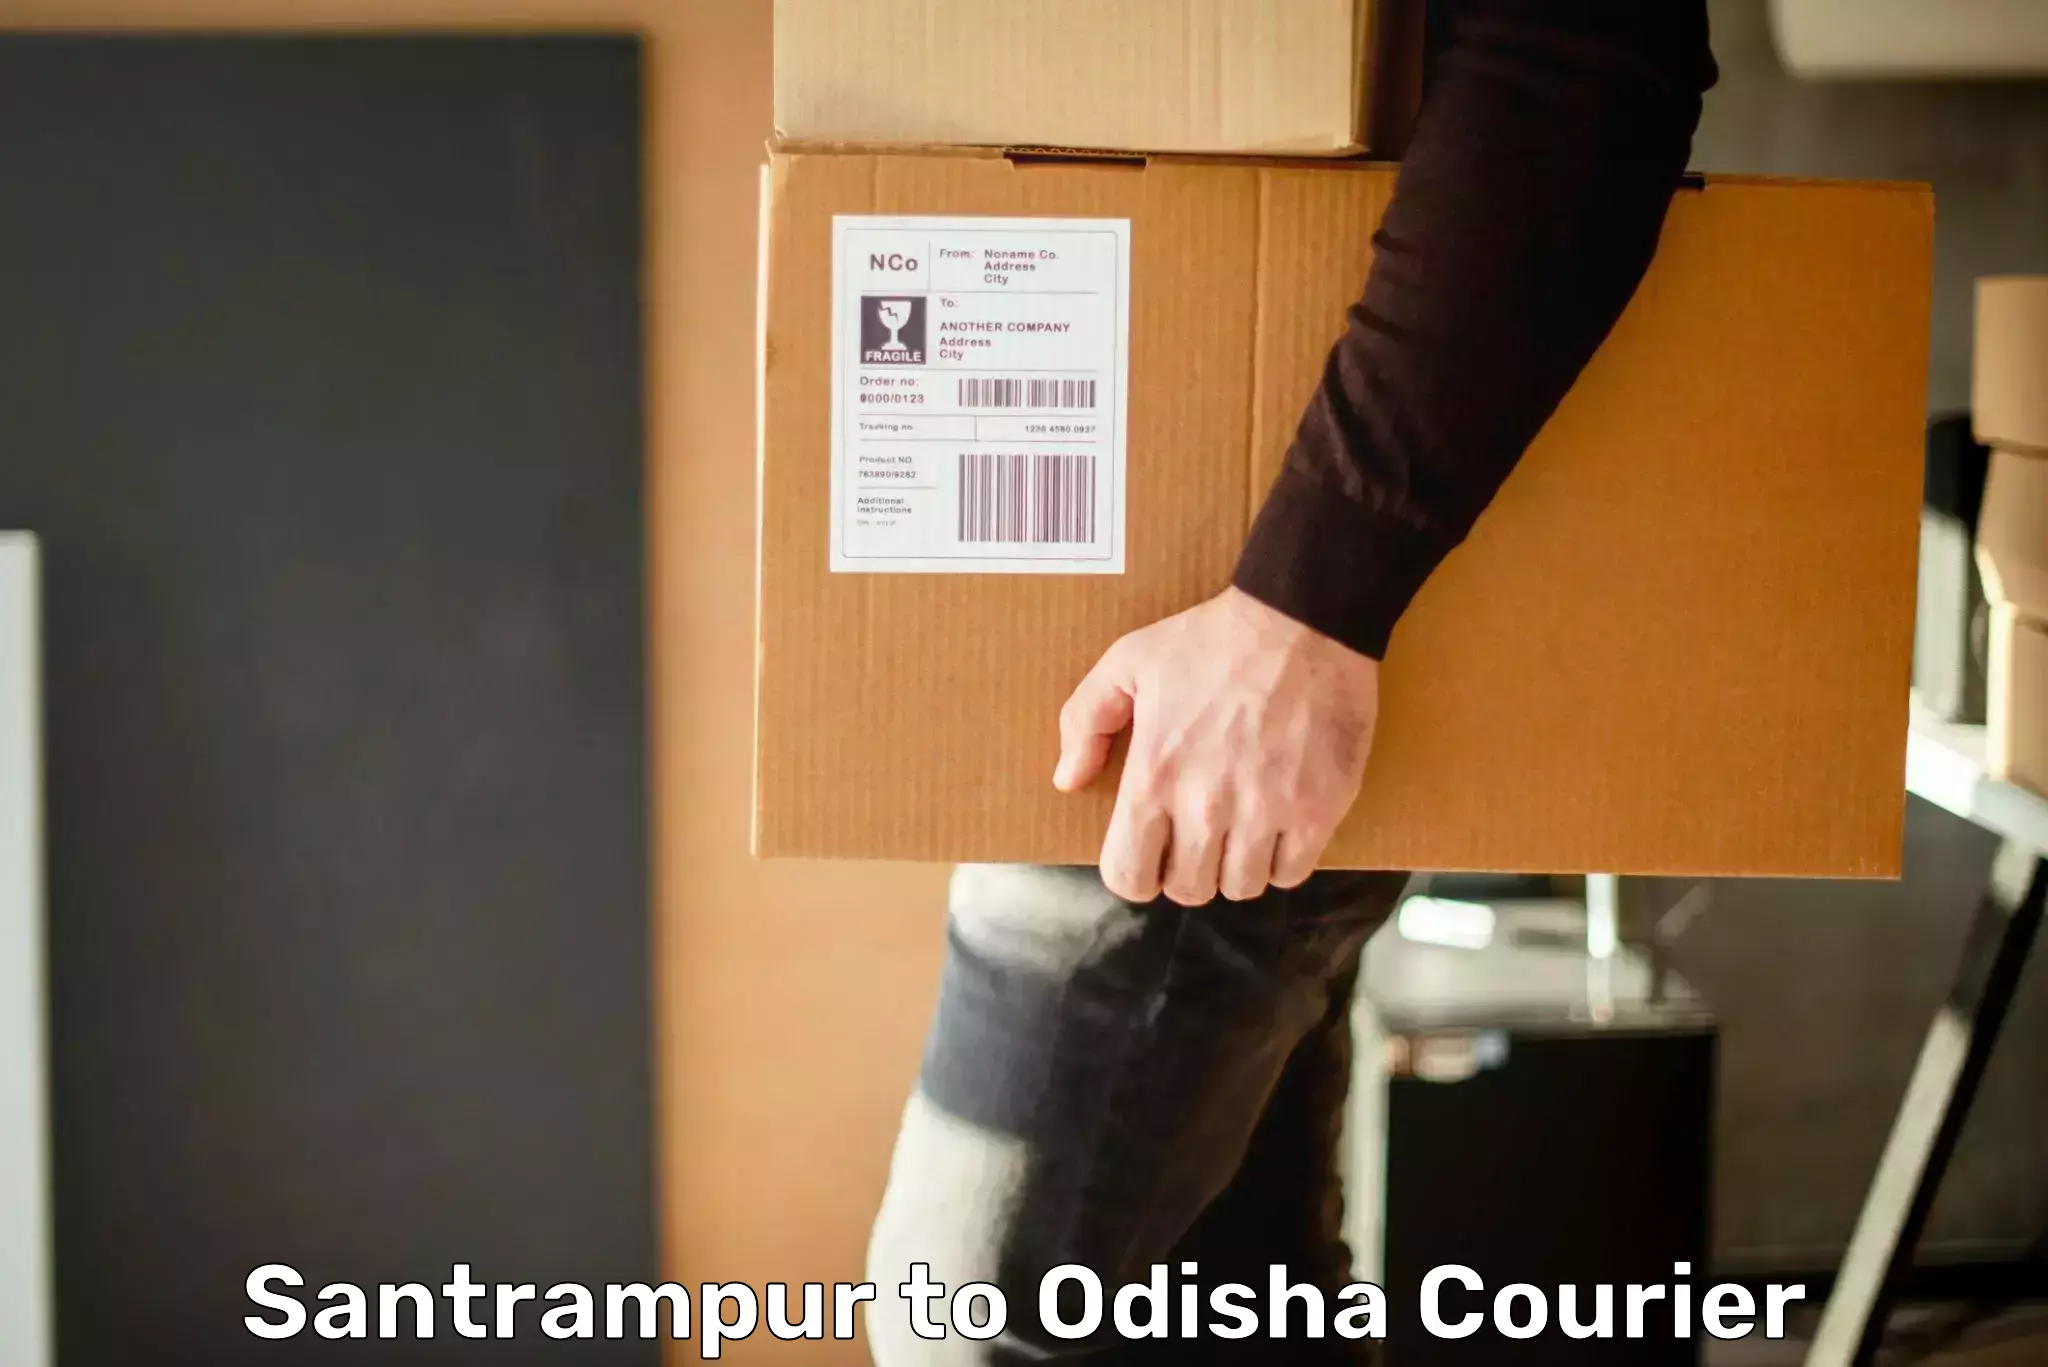 Online package tracking Santrampur to Odisha